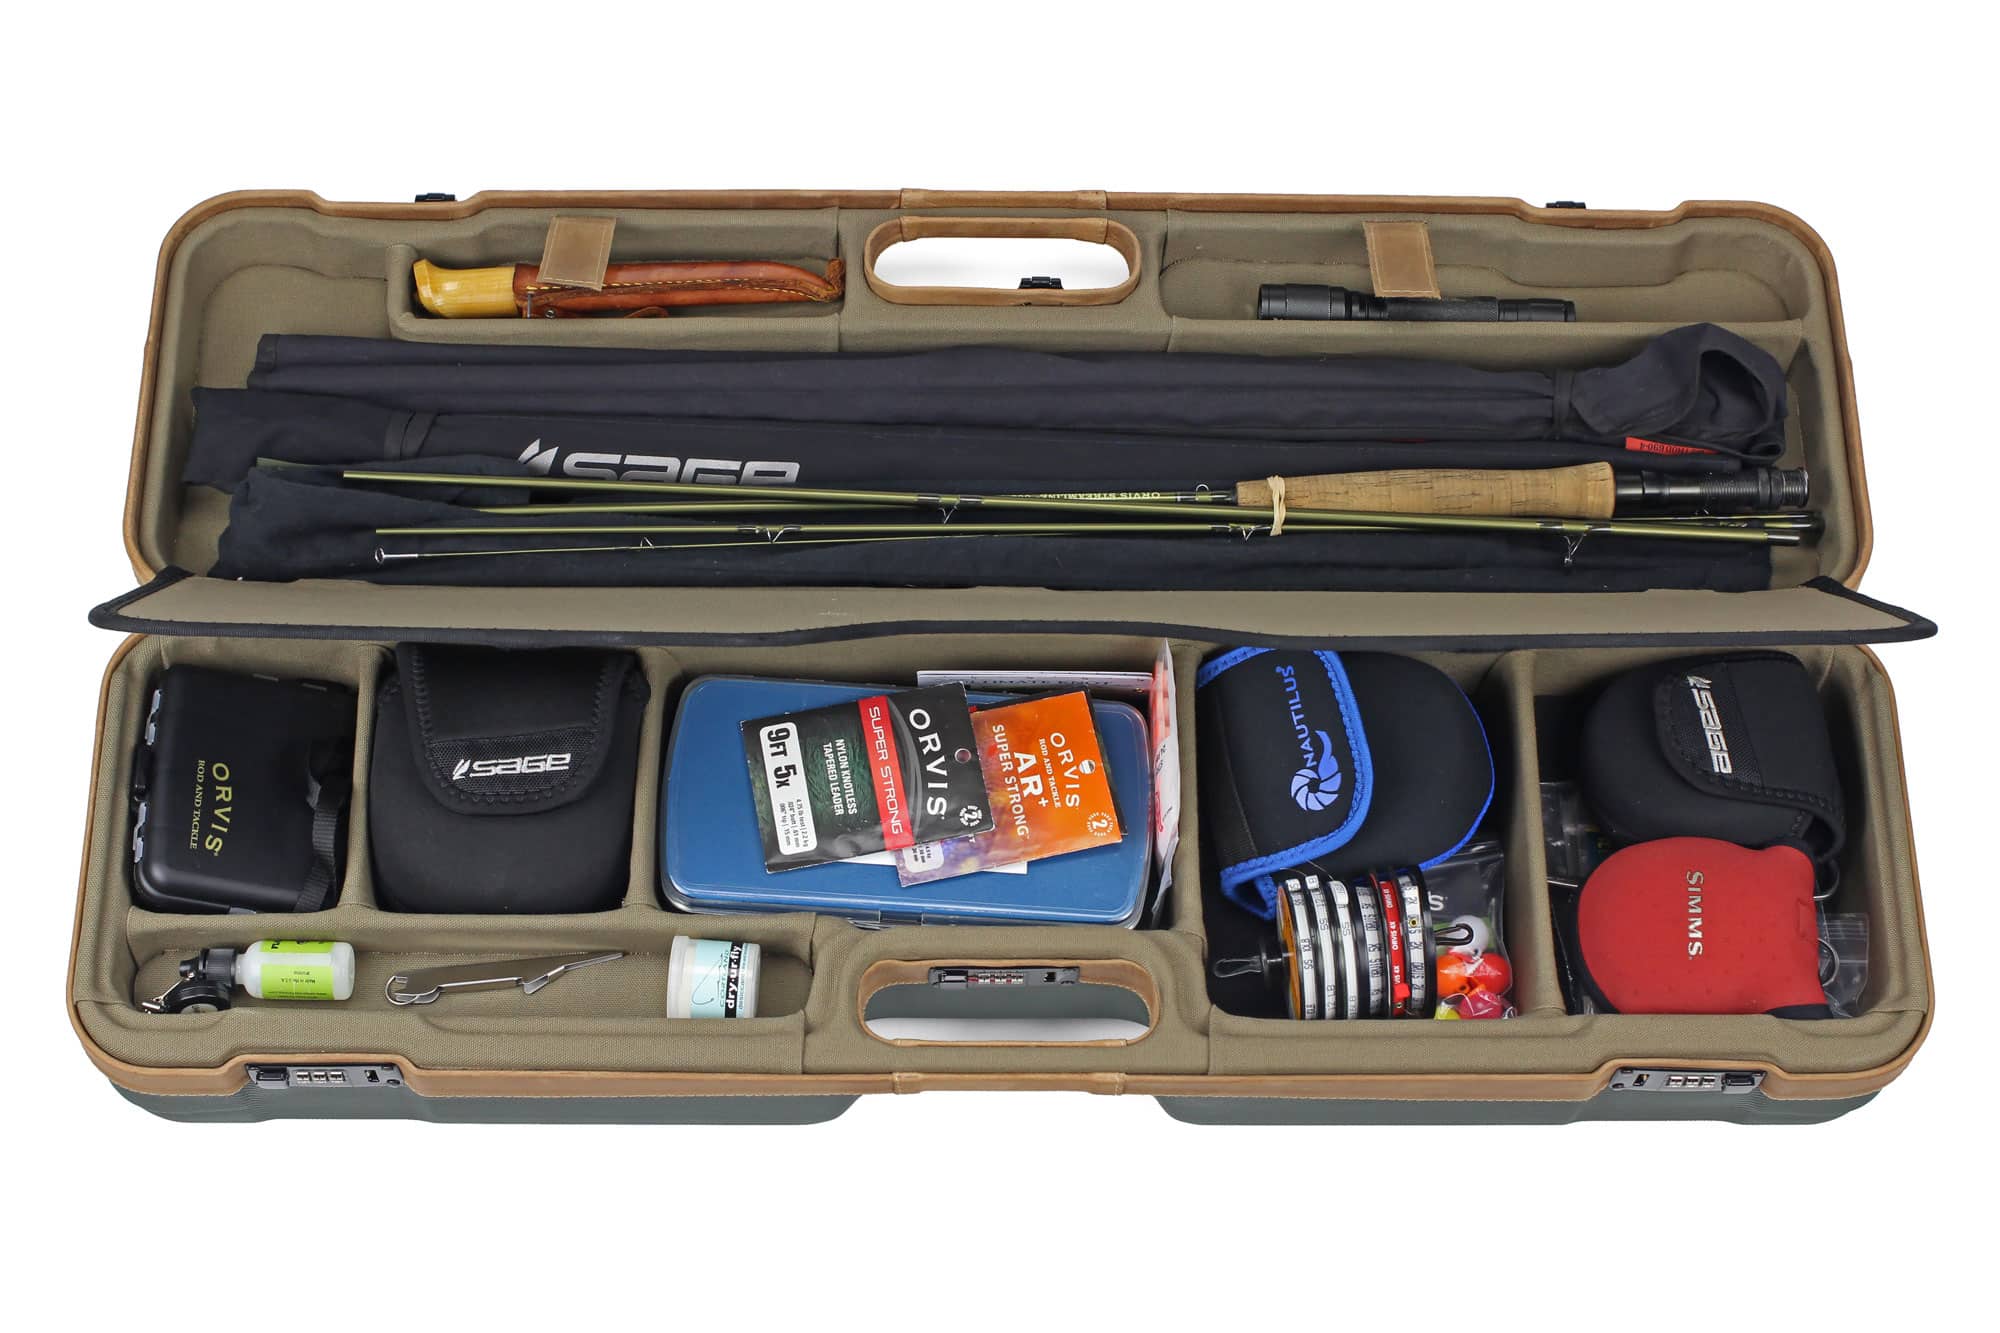 Expedition Classic Fly Fishing Rod and Reel Travel Case - 9' 6 Rod